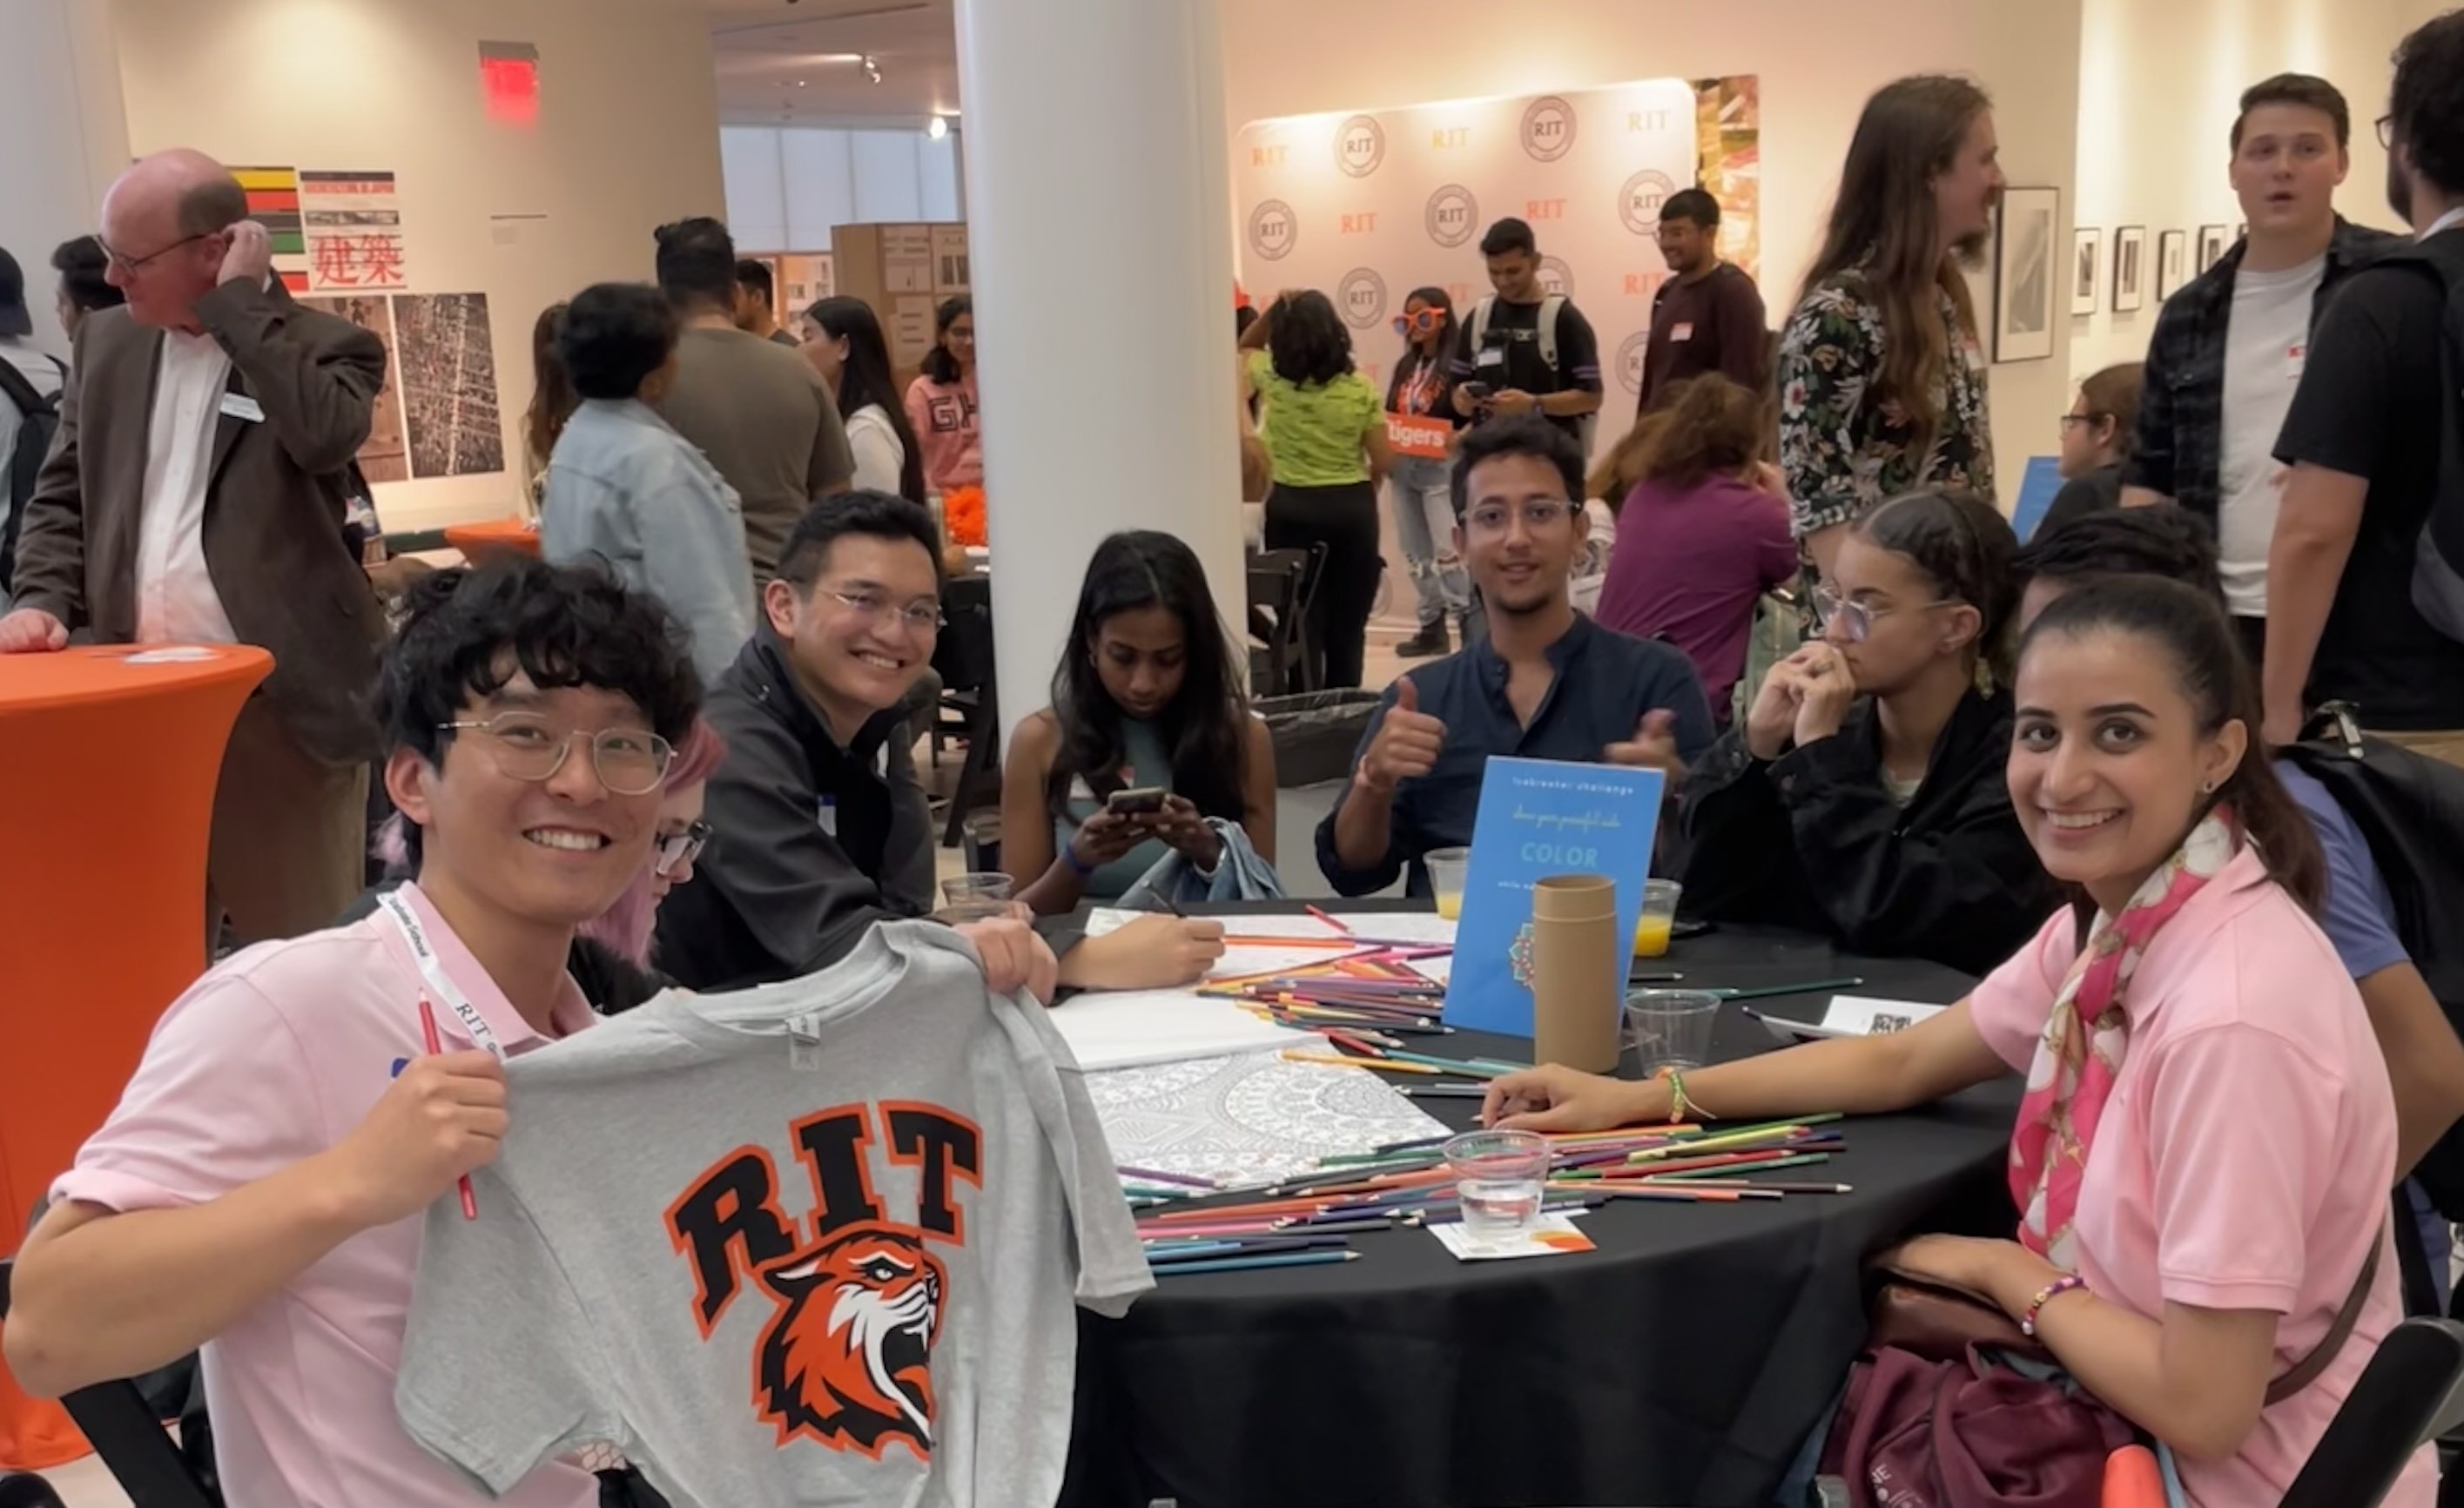 New graduate students sitting on a circular table with one student holding up and showing a gray RIT T-shirt while others smile at the camera